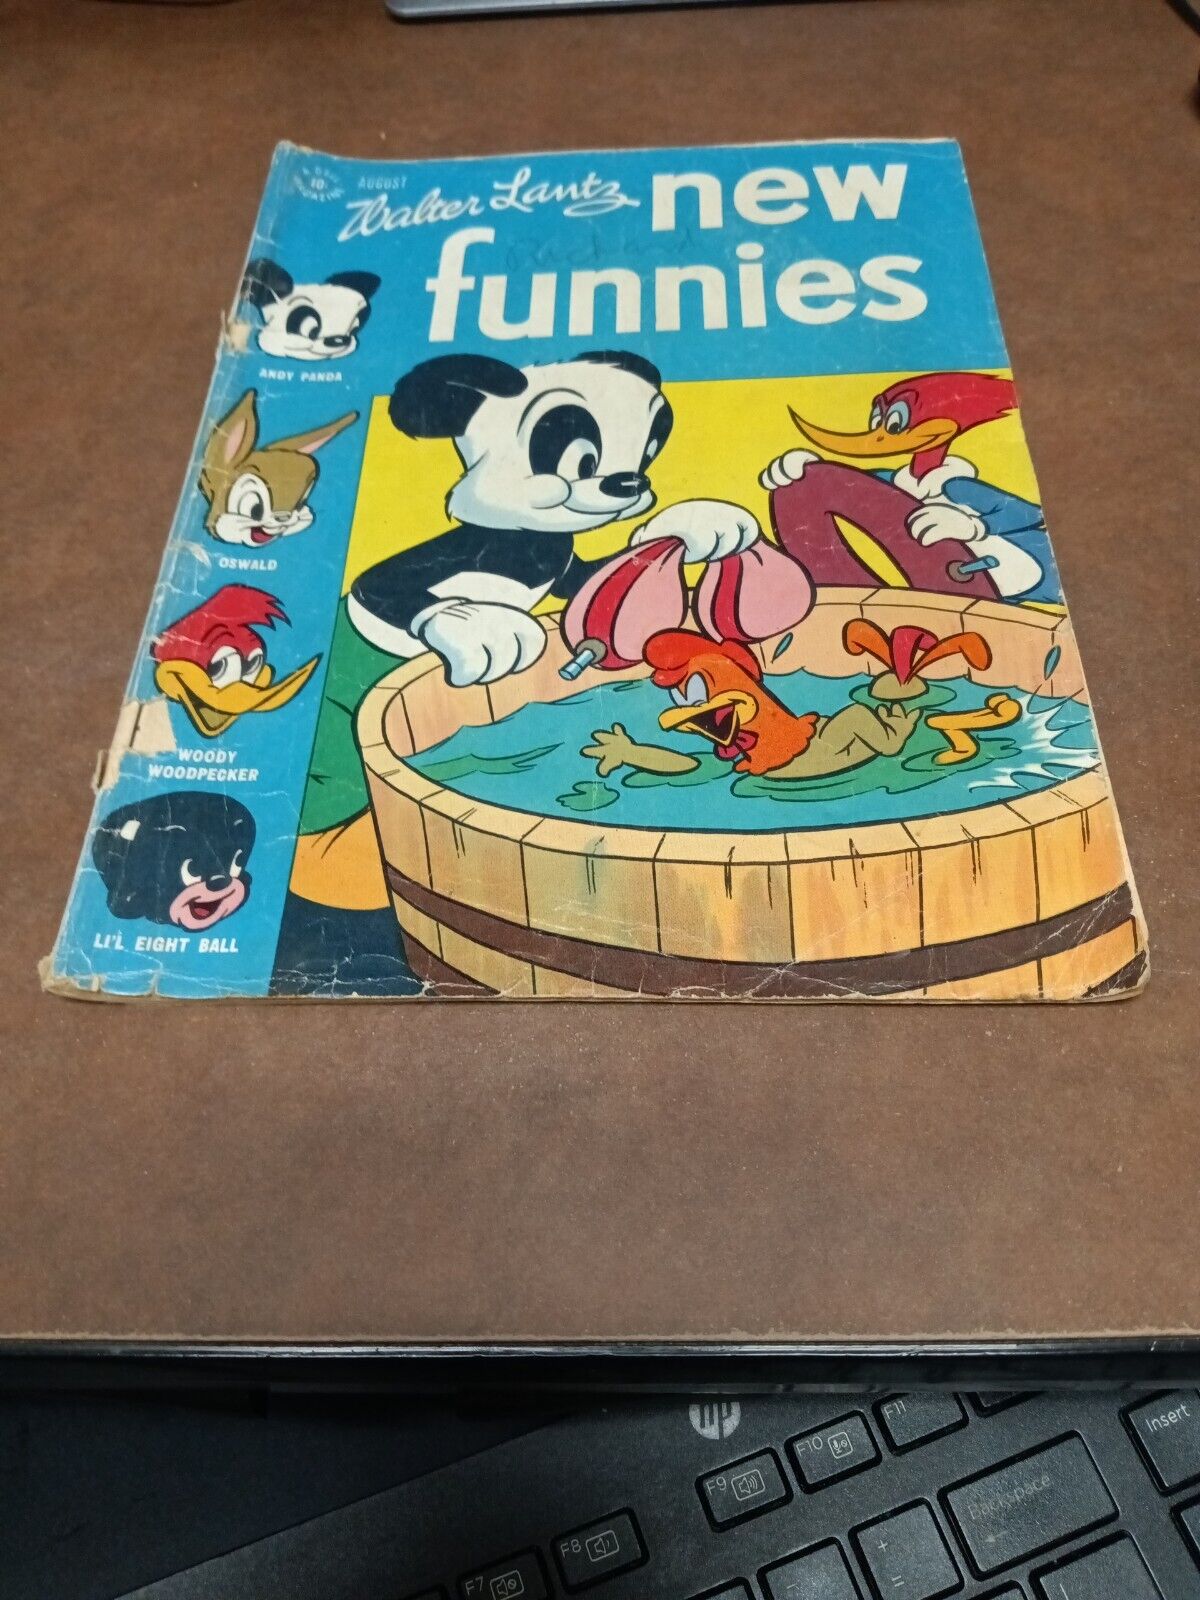 New Funnies #114 Dell comics 1946 golden age Andy panda woody woodpecker oswald